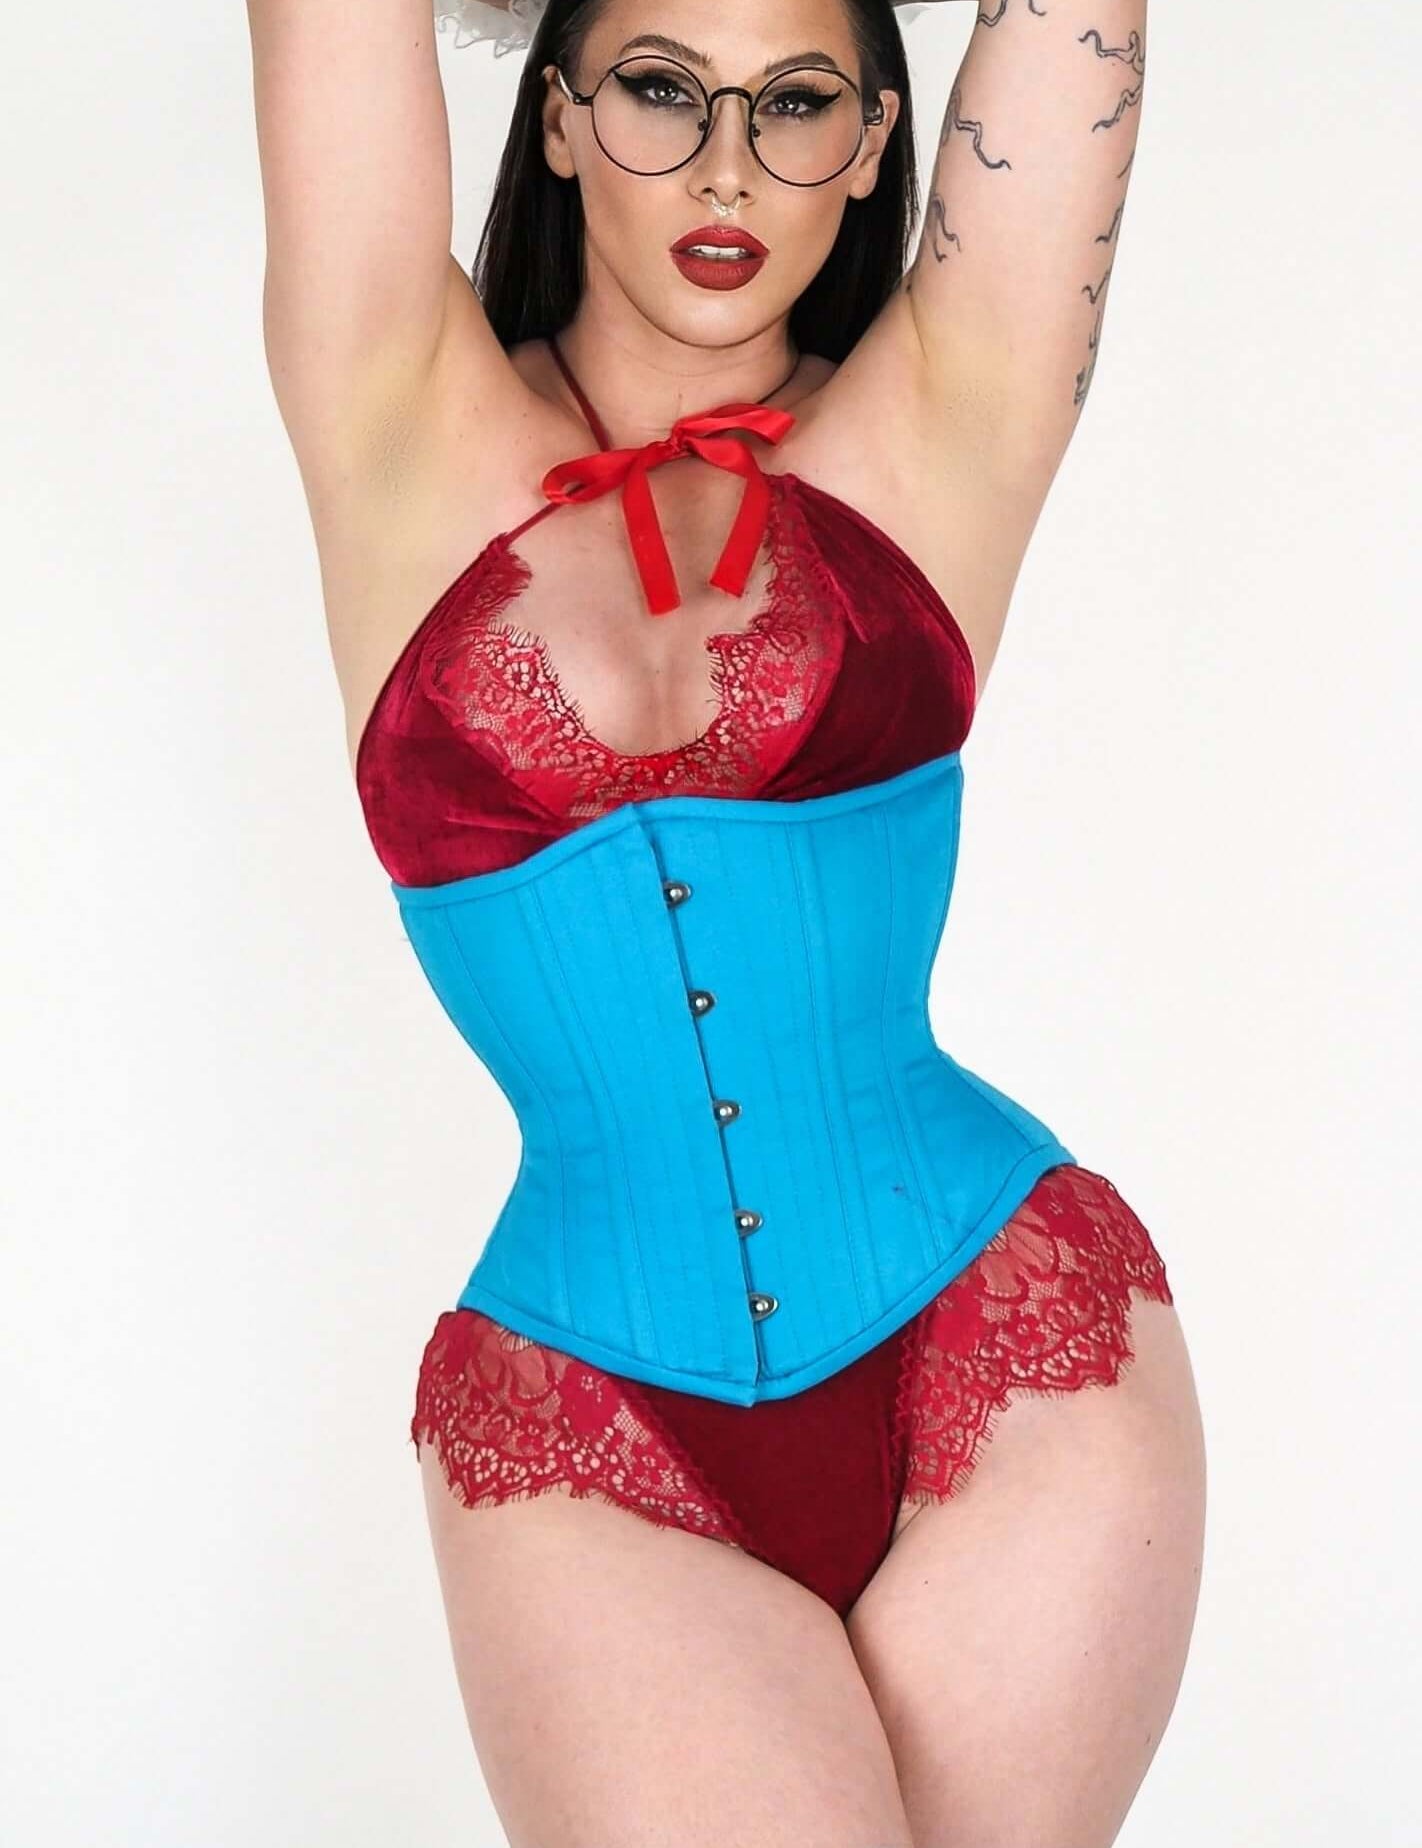 Artemis Hourglass Silhouette Corset In Aqua Designed by Lucy's Corsetry